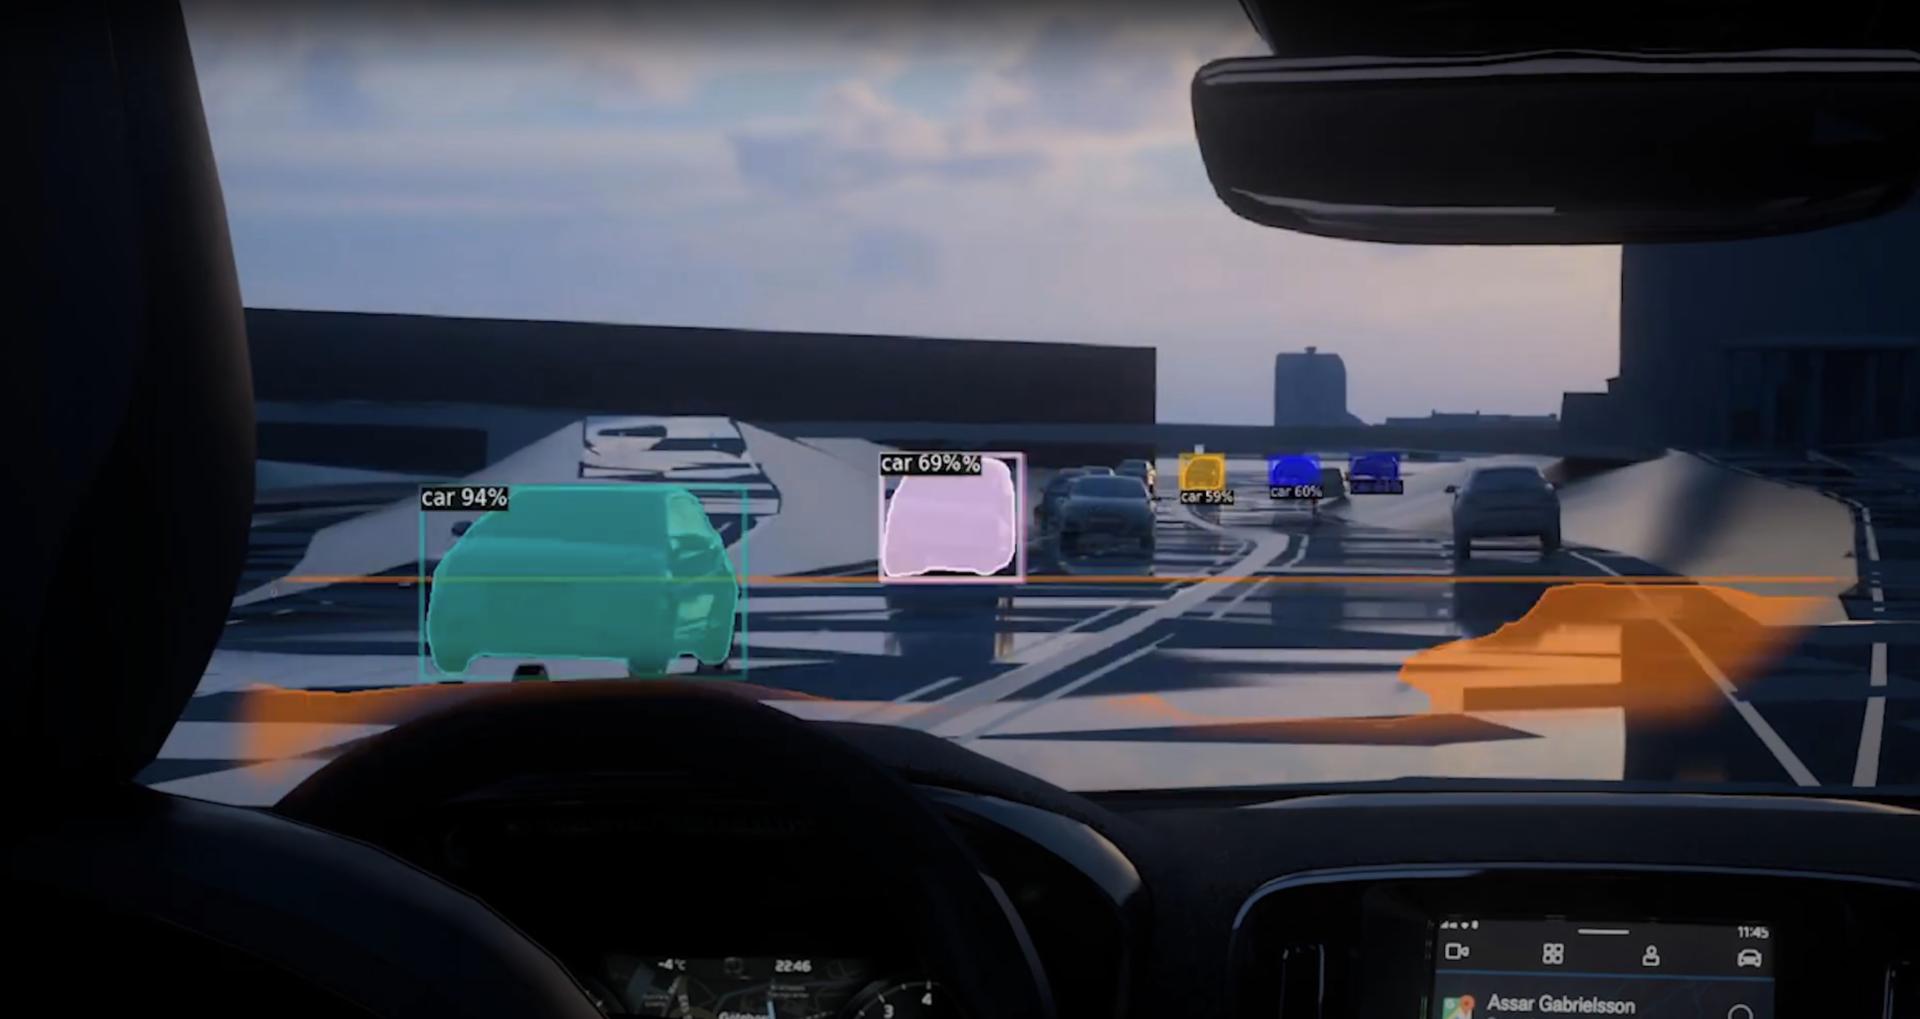 The road from inside a digital car 